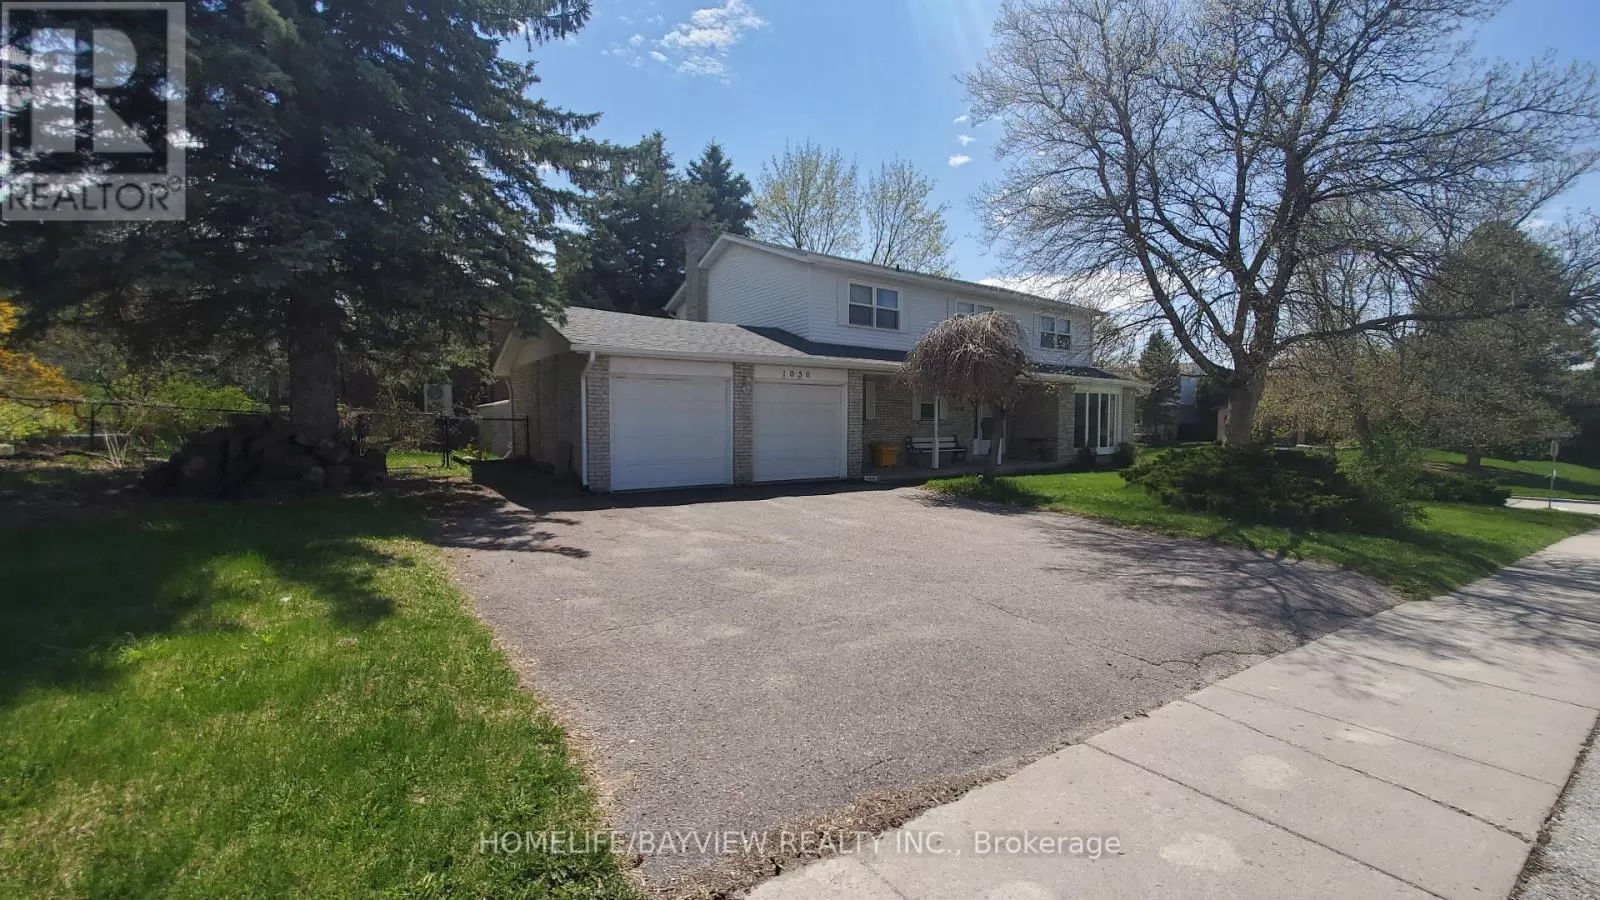 House for rent: 1056 Wayne Drive, Newmarket, Ontario L3Y 6H7